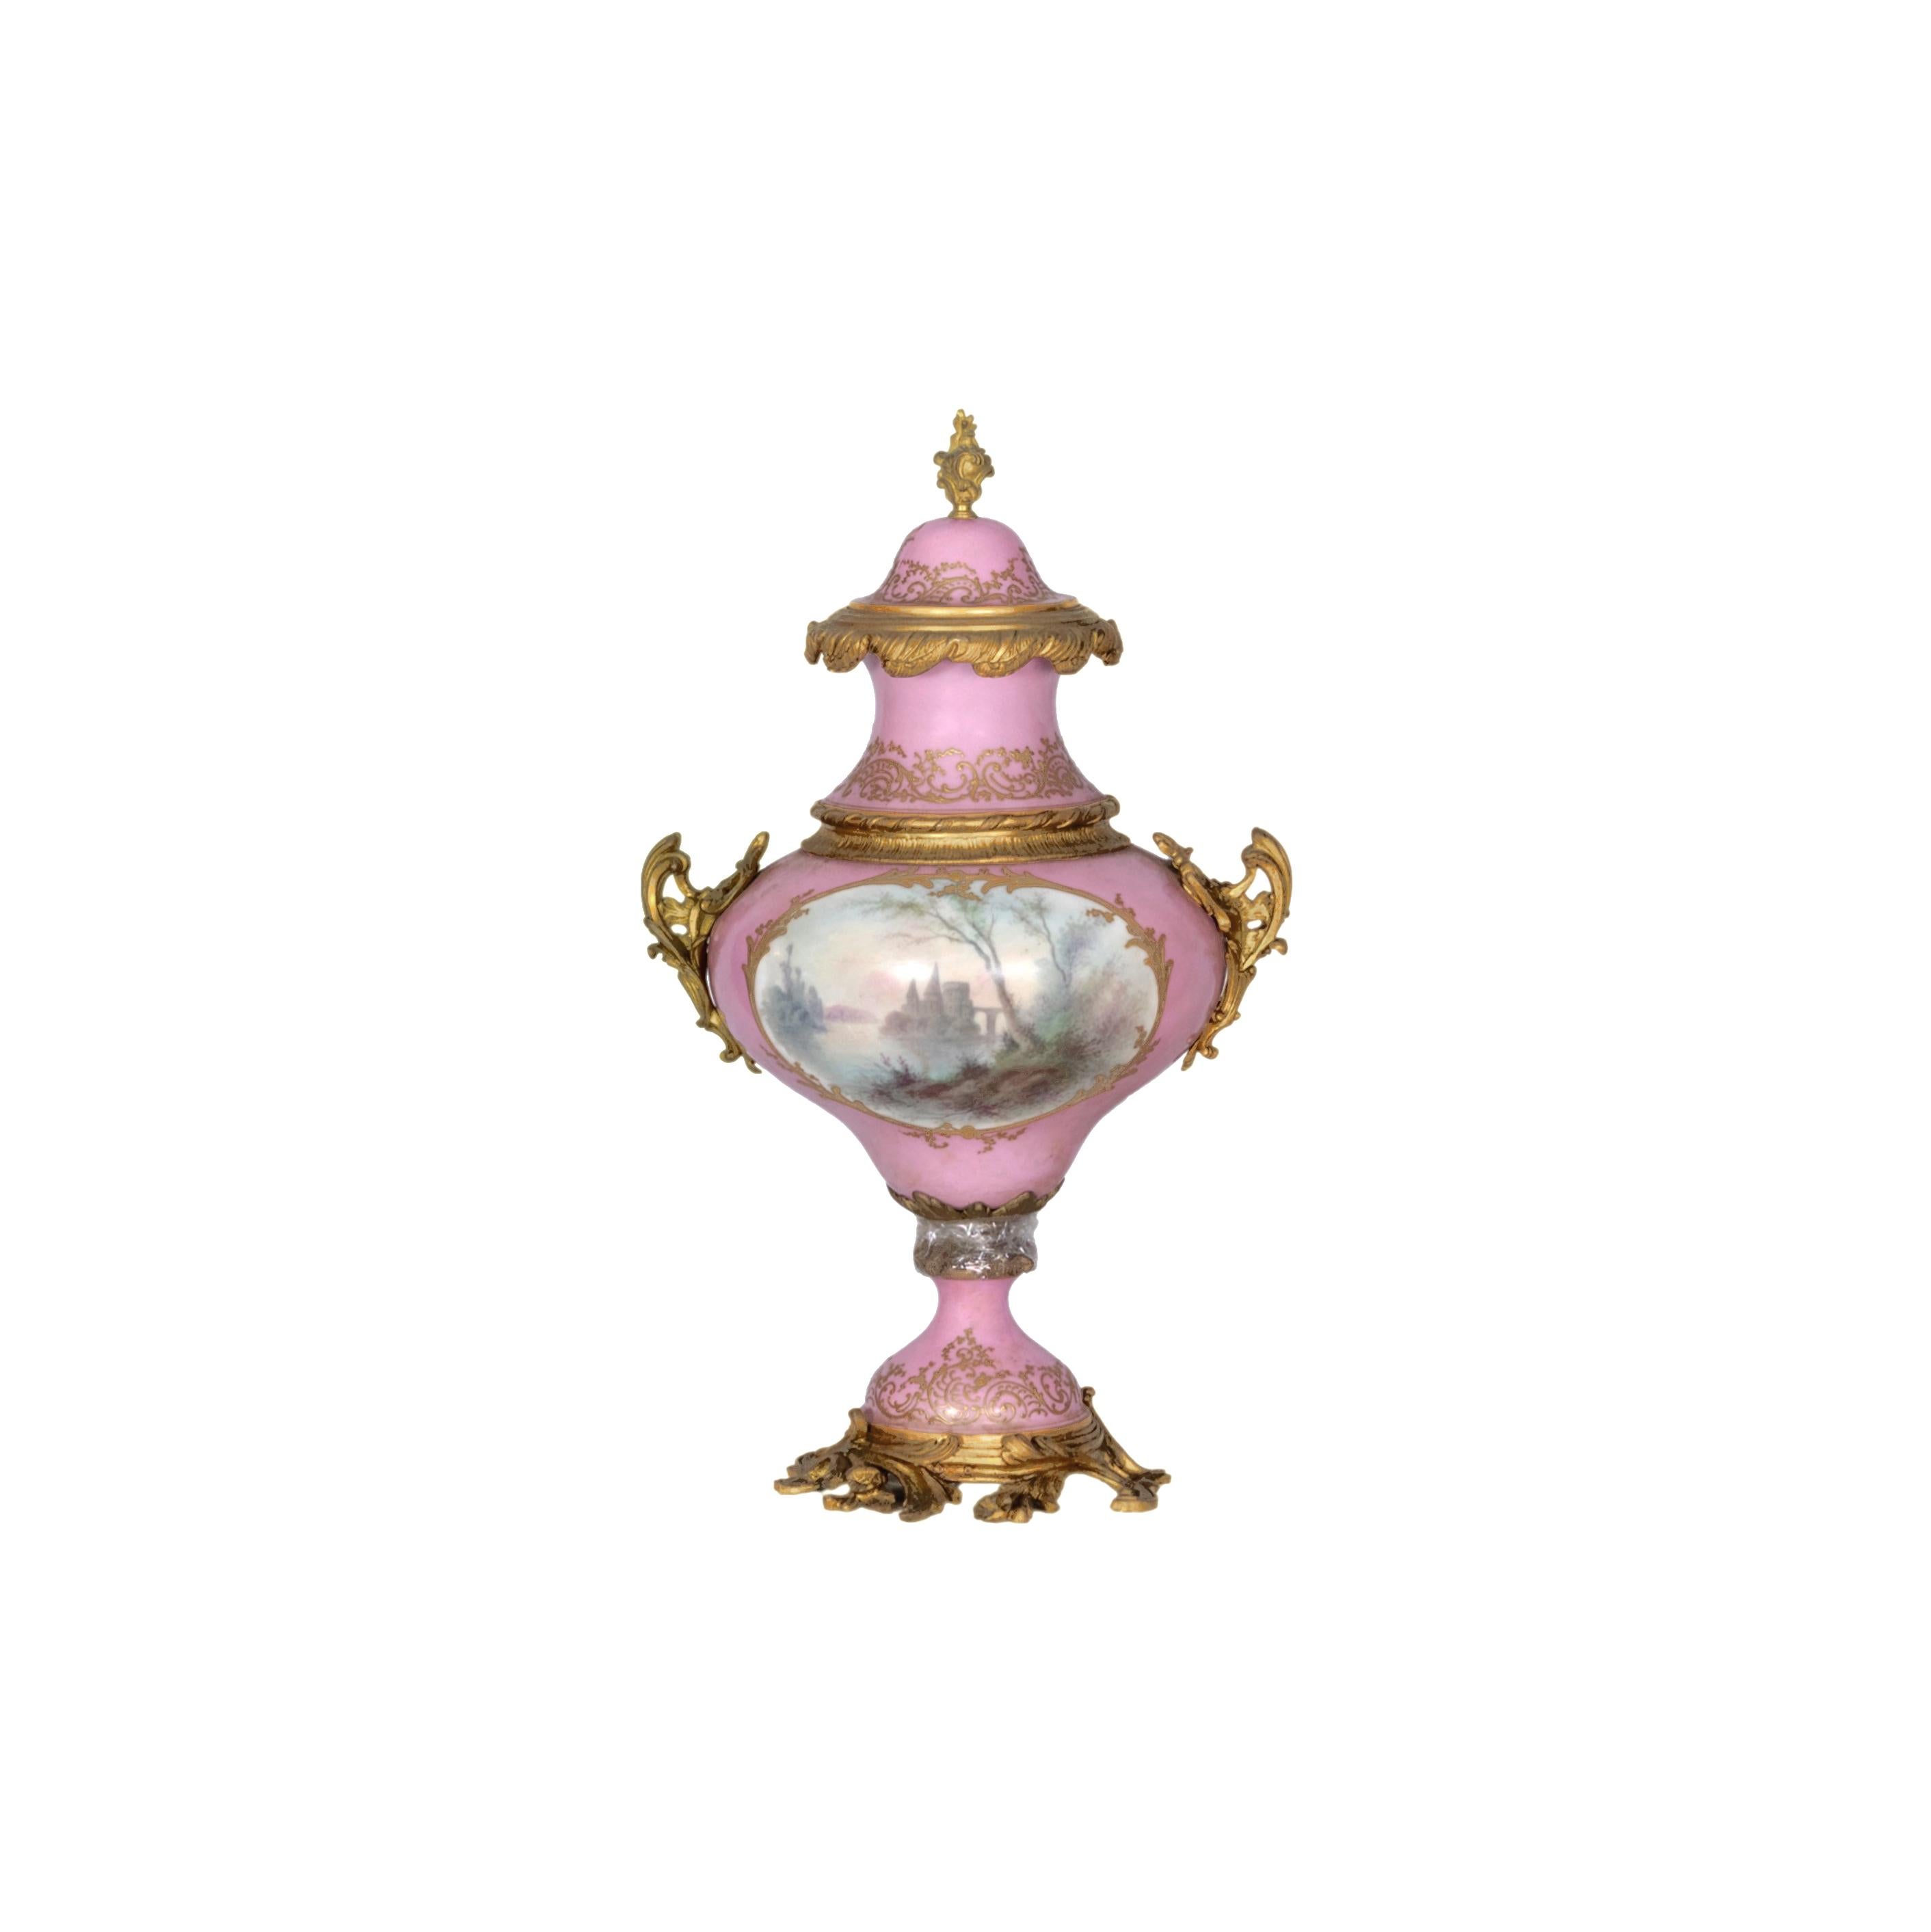 A beautiful antique decorative pink porcelain Sèvres urn with a hand-painted background of a guitar musician and his lady. A Serenata scene.  In the back a lake scene with a castle. ‘E . Rolli’ signature on the side, painted scenes  in the manner of